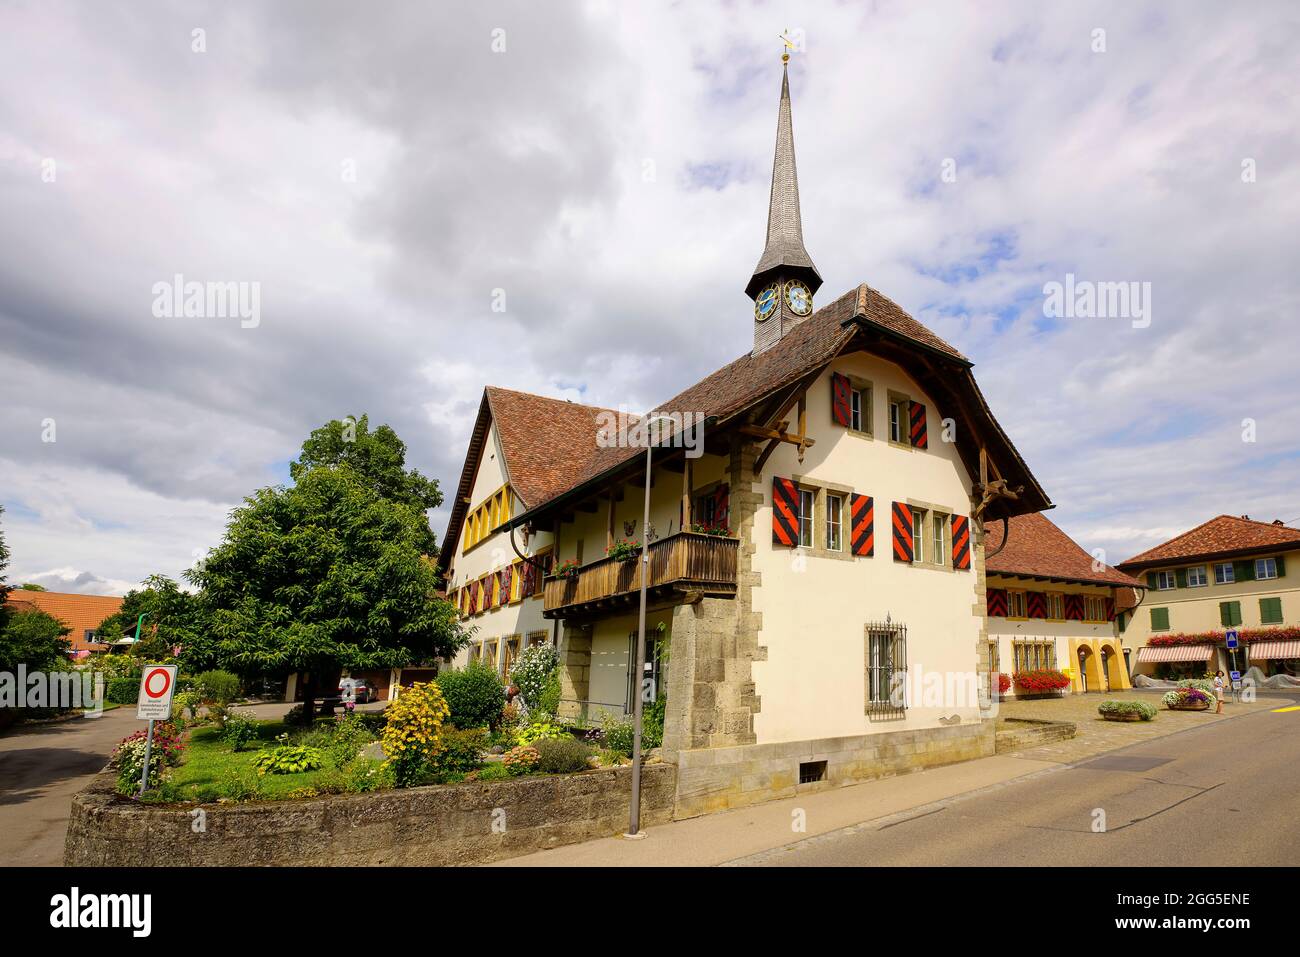 Picturesque Town Hall (Gemaindehaus) in Ins. Ins is the municipality in the Bern region and is a local administrative unit. ruled by a mayor. pictures Stock Photo